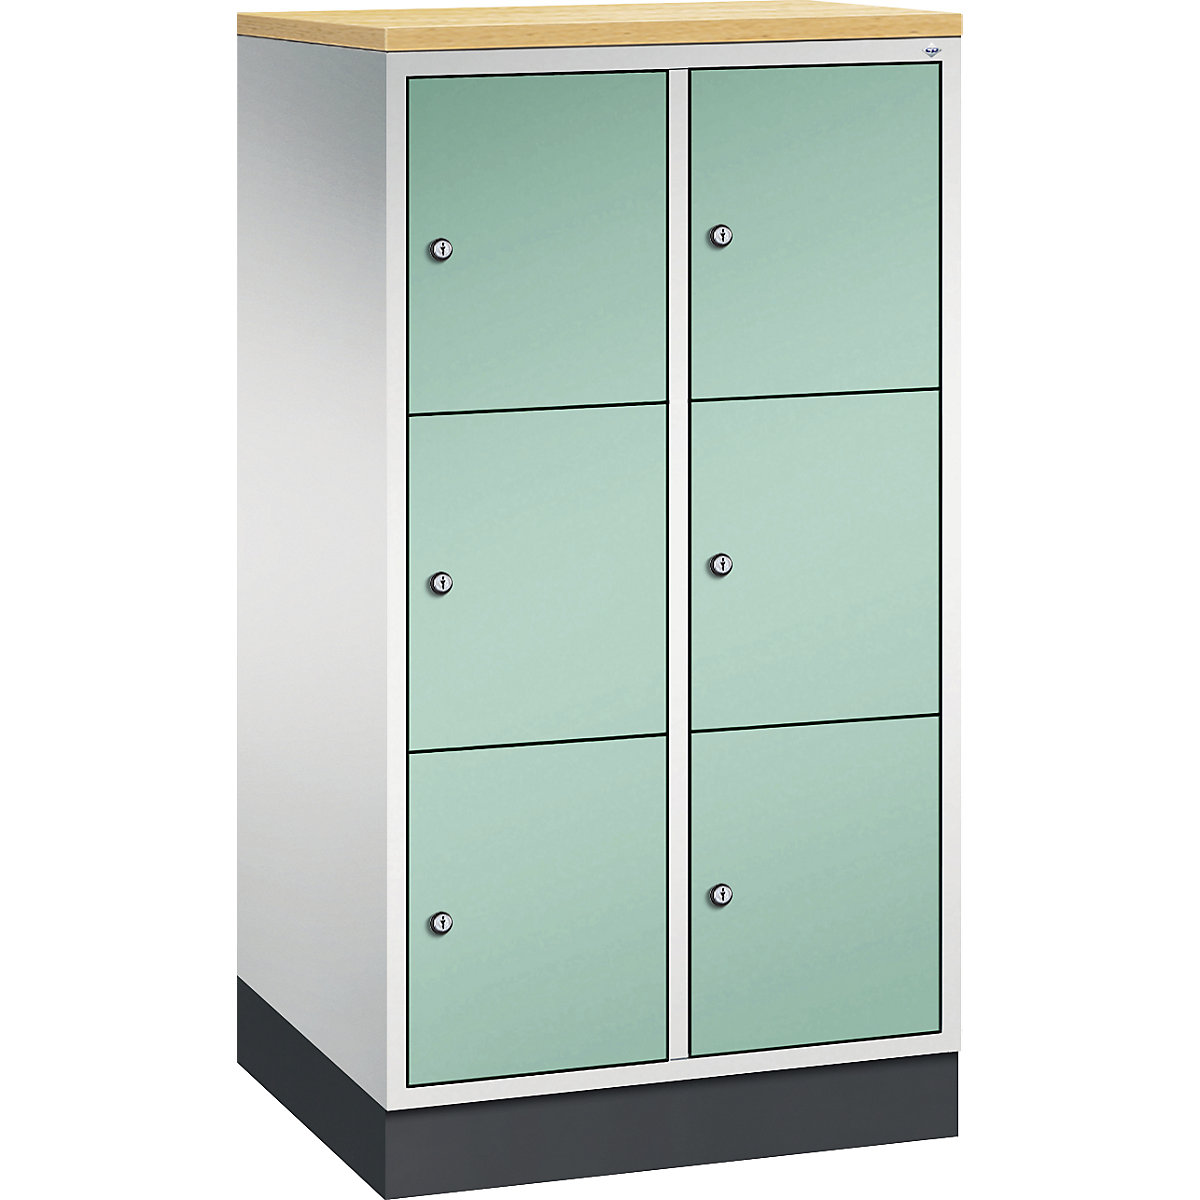 INTRO steel compartment locker, compartment height 345 mm – C+P, WxD 620 x 500 mm, 6 compartments, light grey body, light green doors